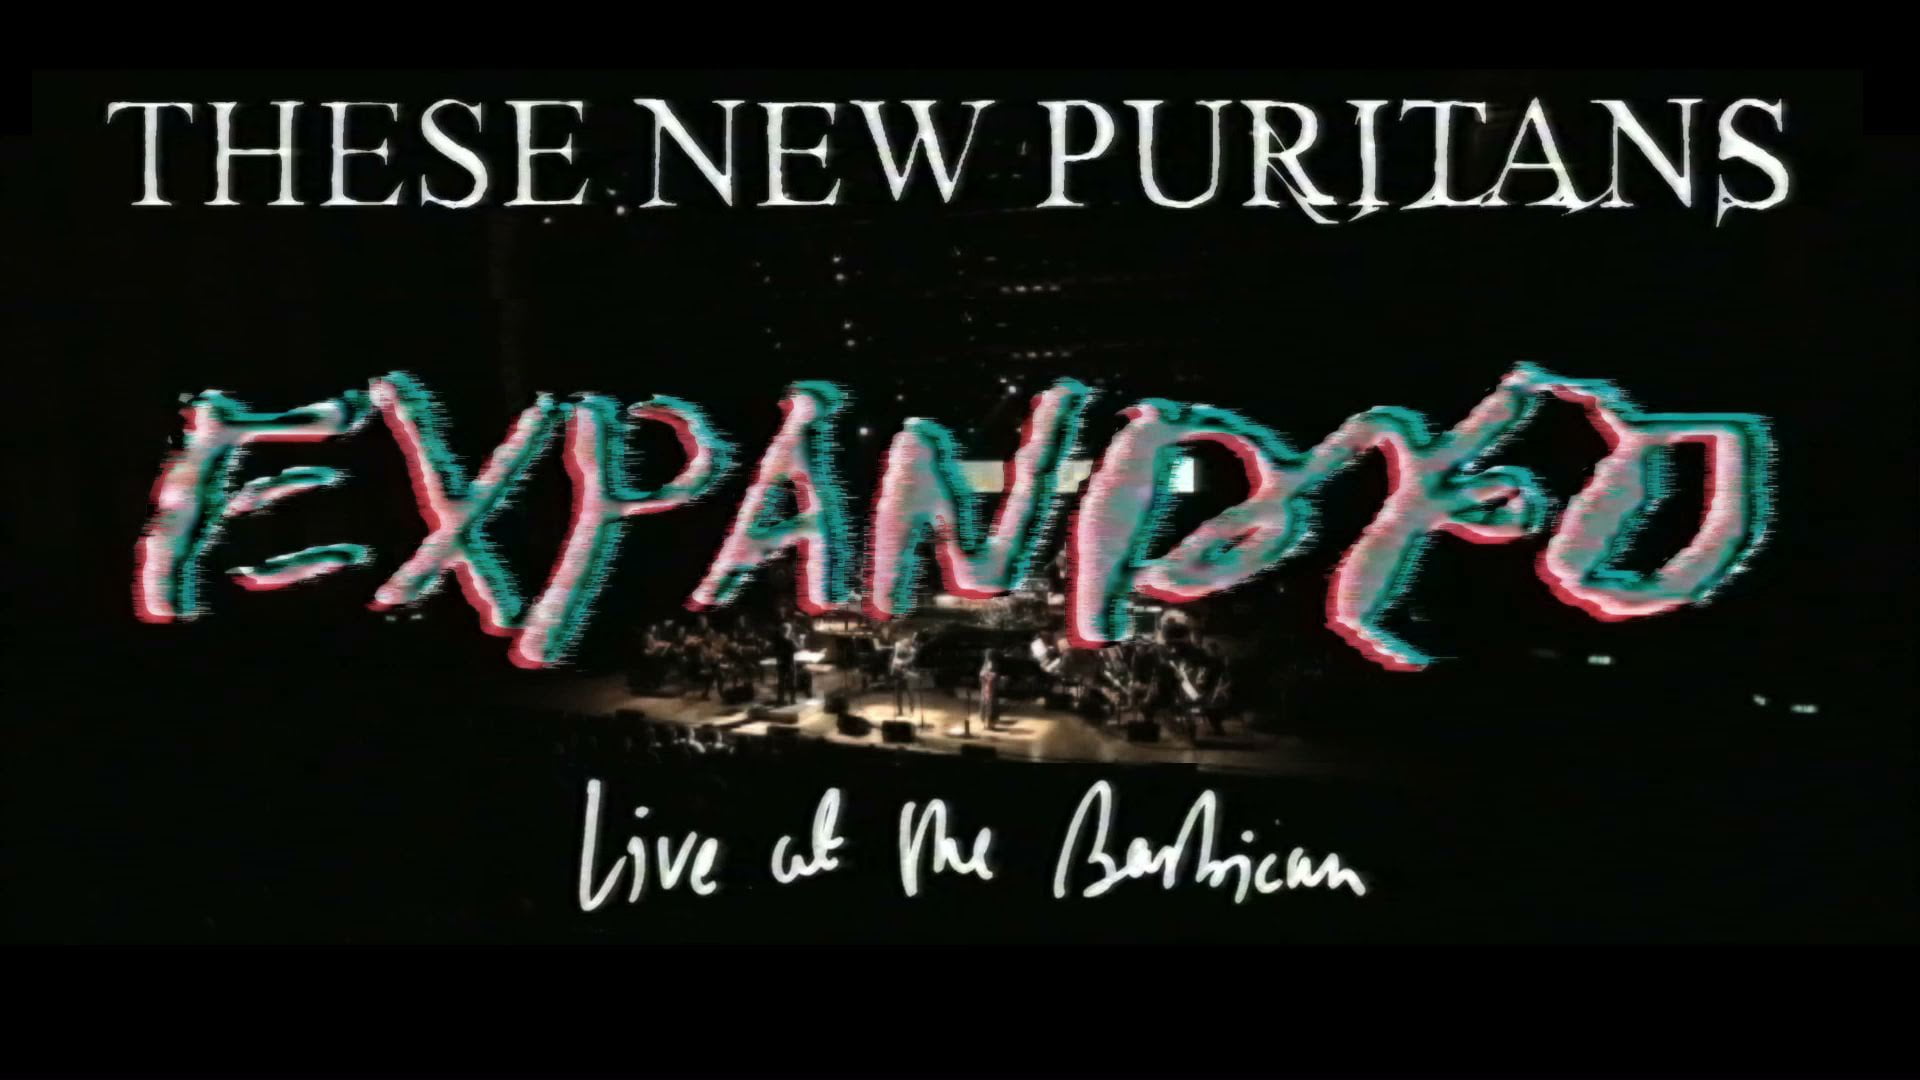 These New Puritans - 'EXPANDED (Live at the Barbican)'